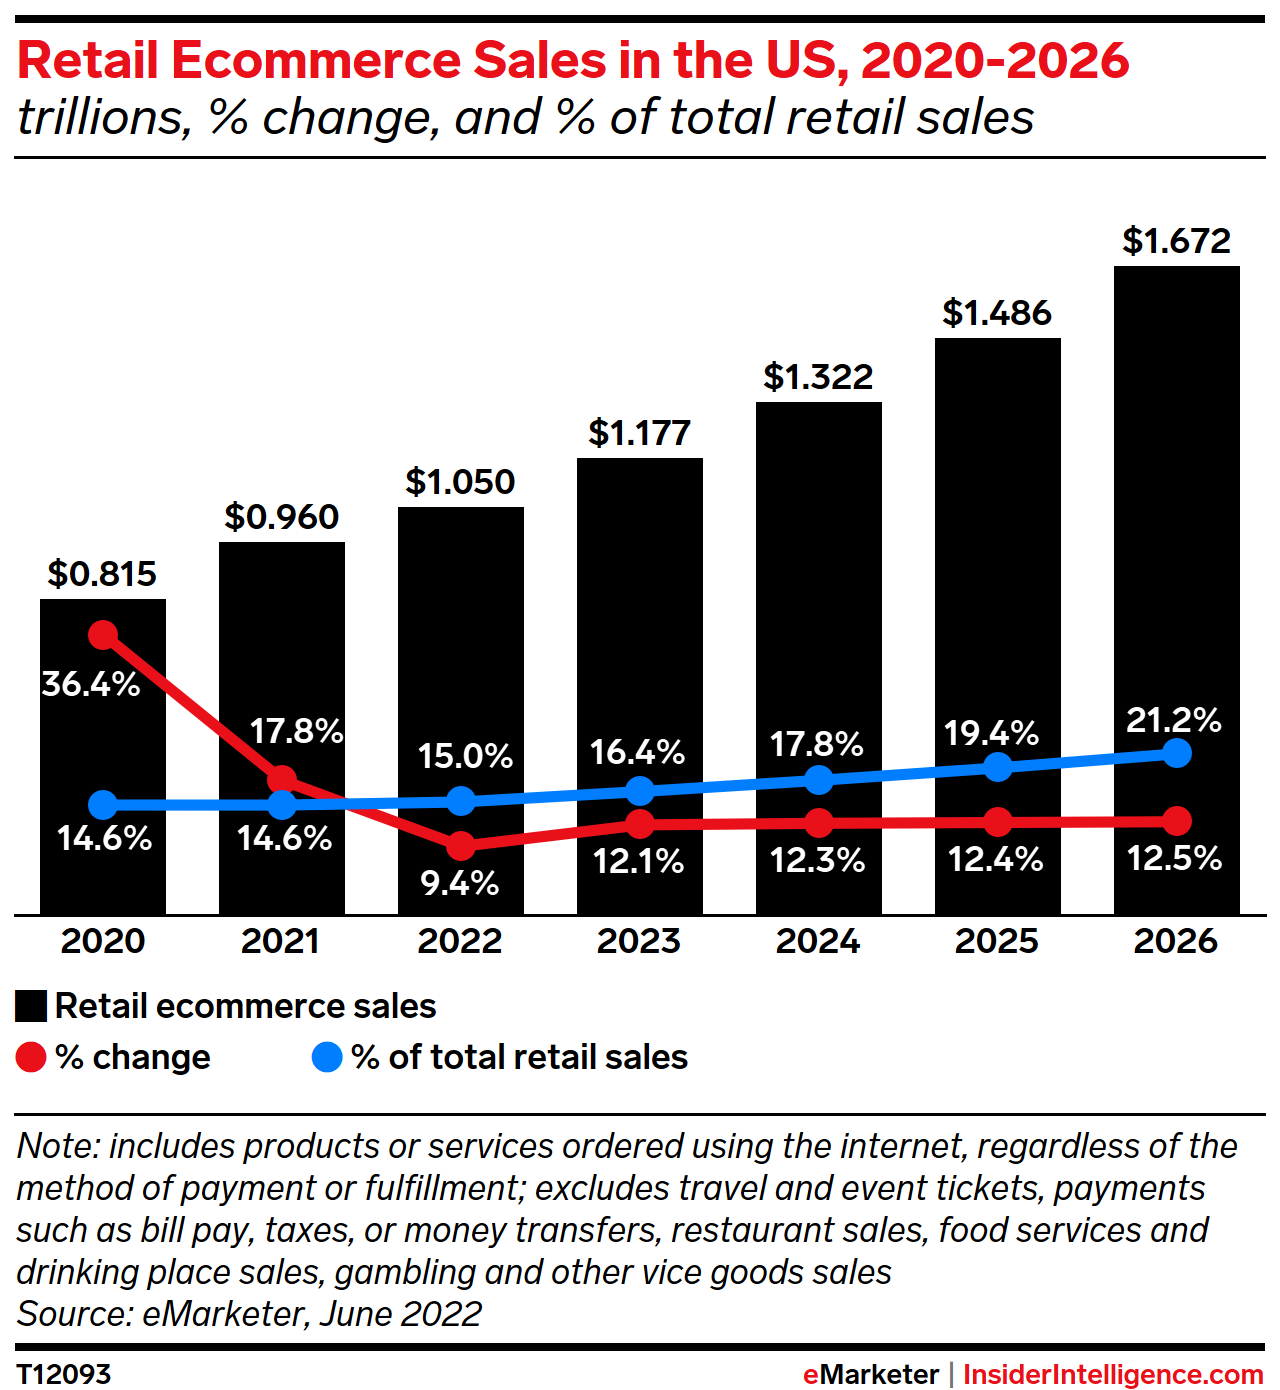 Retail Ecommerce Sales in the US, 2020-2026 (trillions, % change, and % of total retail sales)